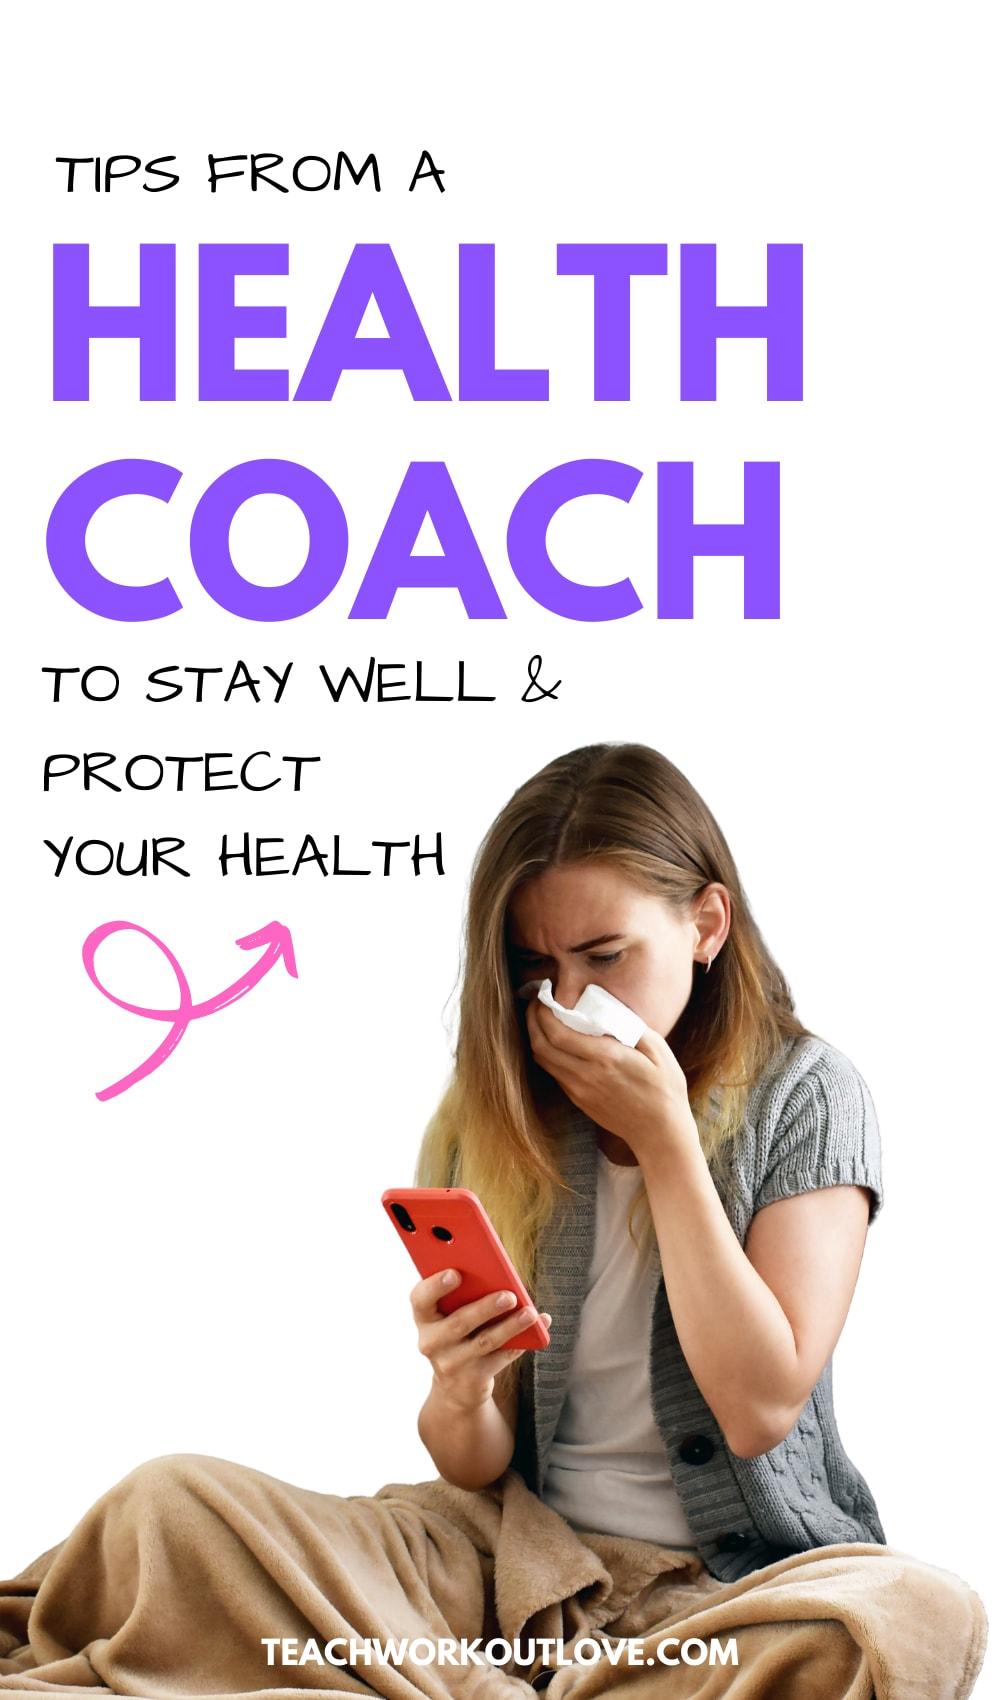 Tips From a Health Coach to Stay Well & Protect Your Health